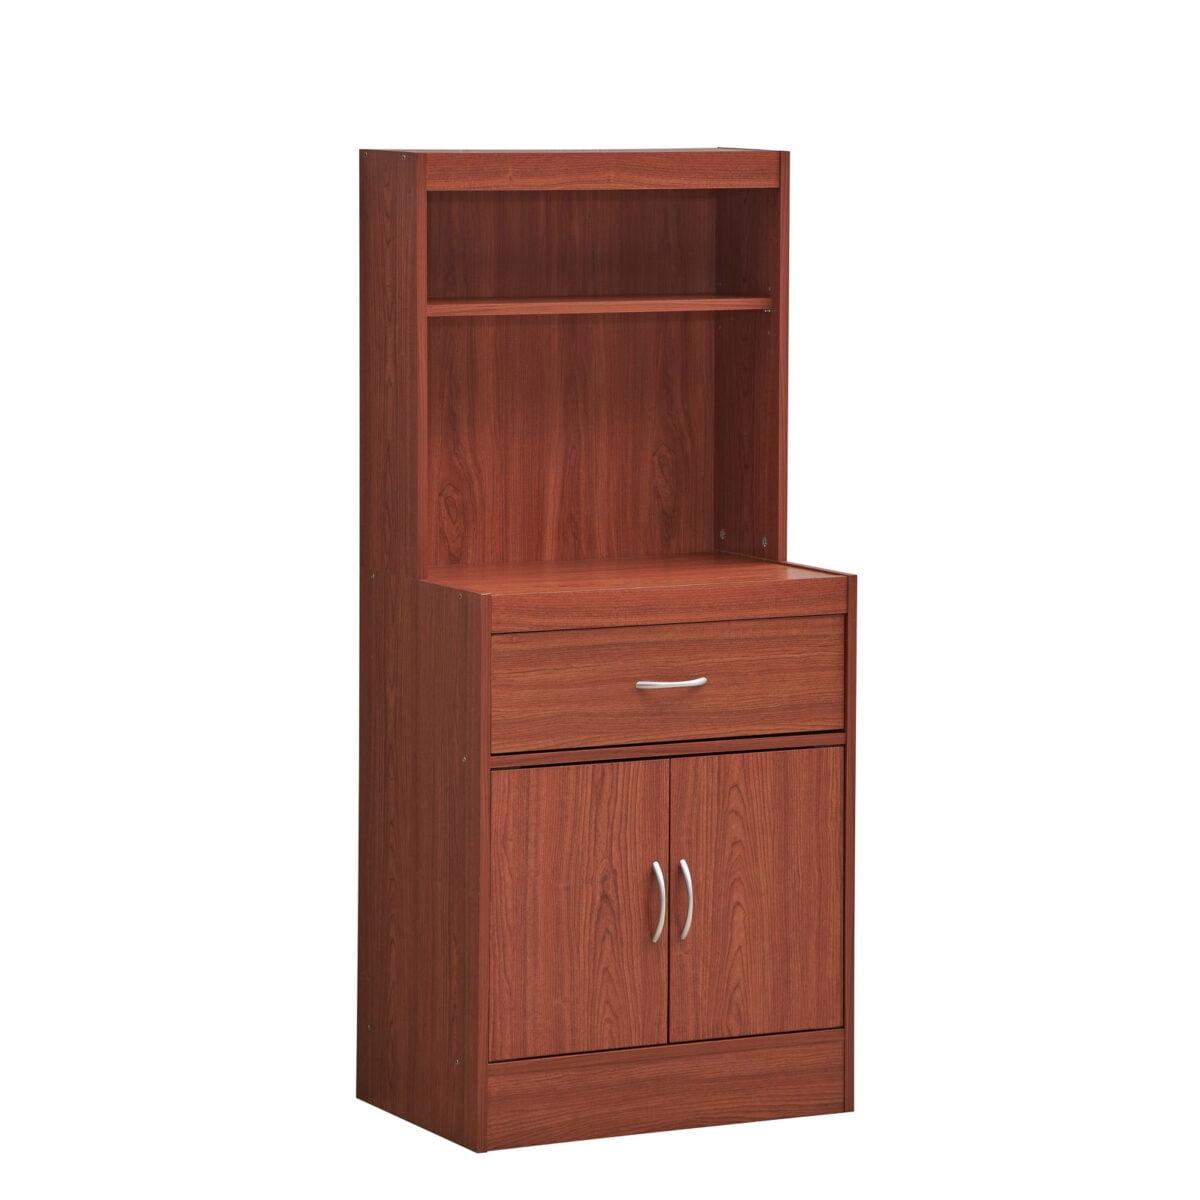 Versatile Cherry Wooden Kitchen Cabinet with Open Shelves and Enclosed Storage